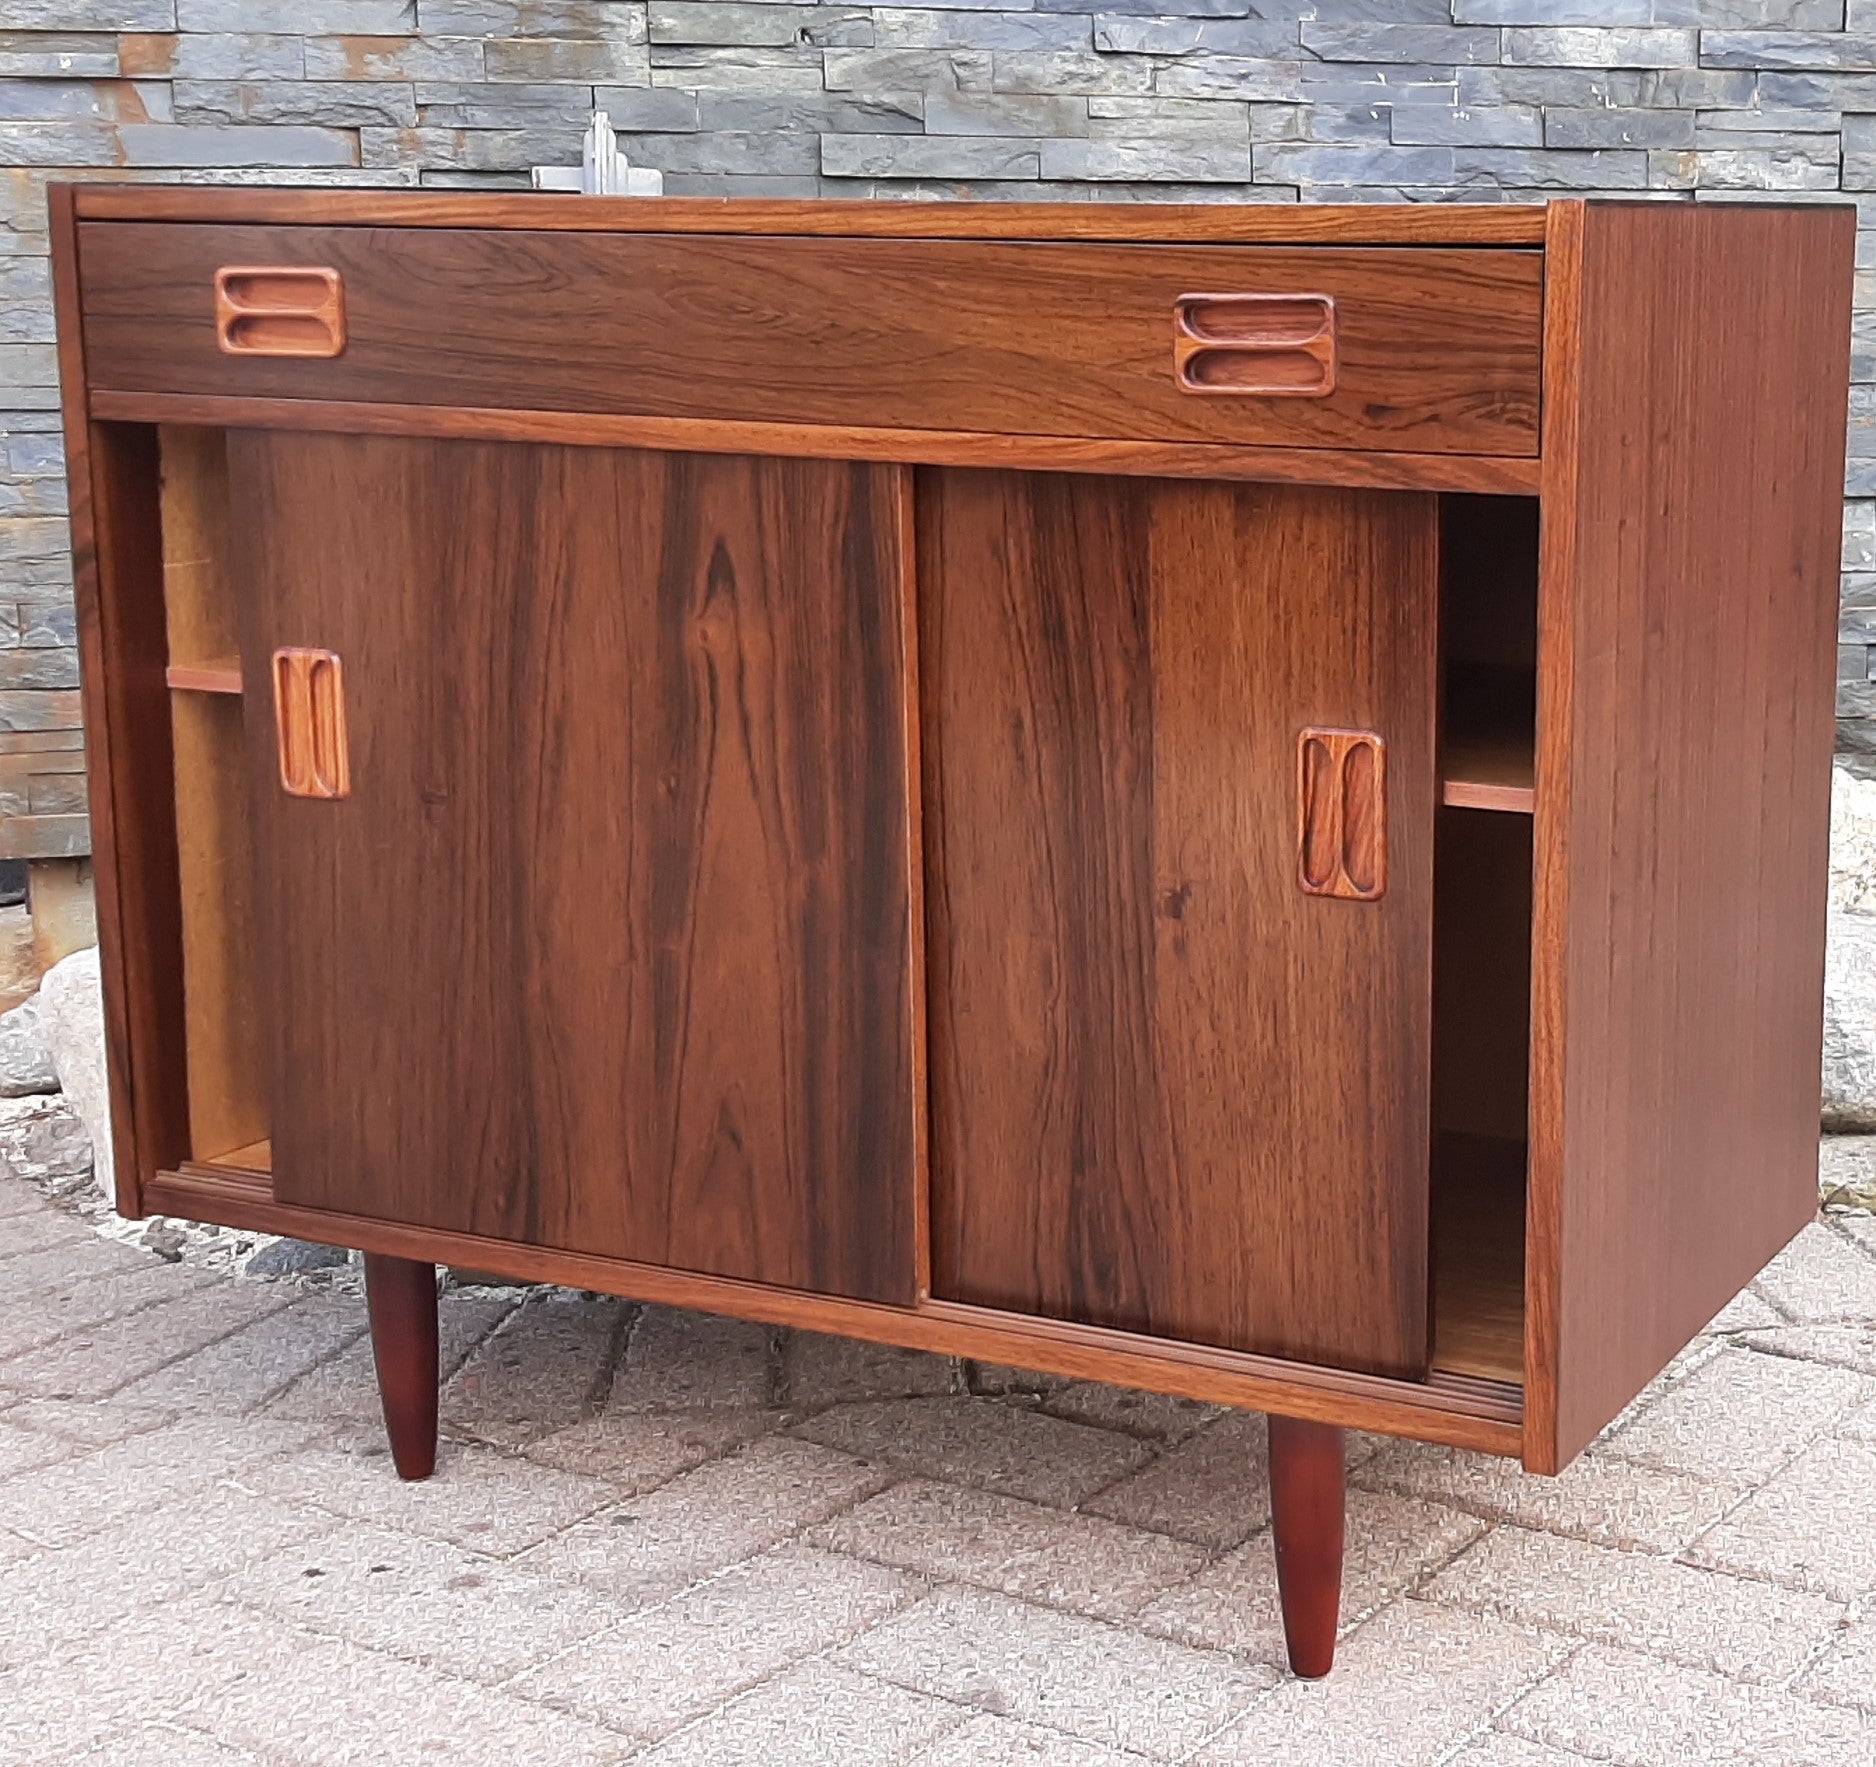 RESTORED Danish MCM Rosewood Cabinet with sliding doors & drawer, compact 34", perfect - Mid Century Modern Toronto